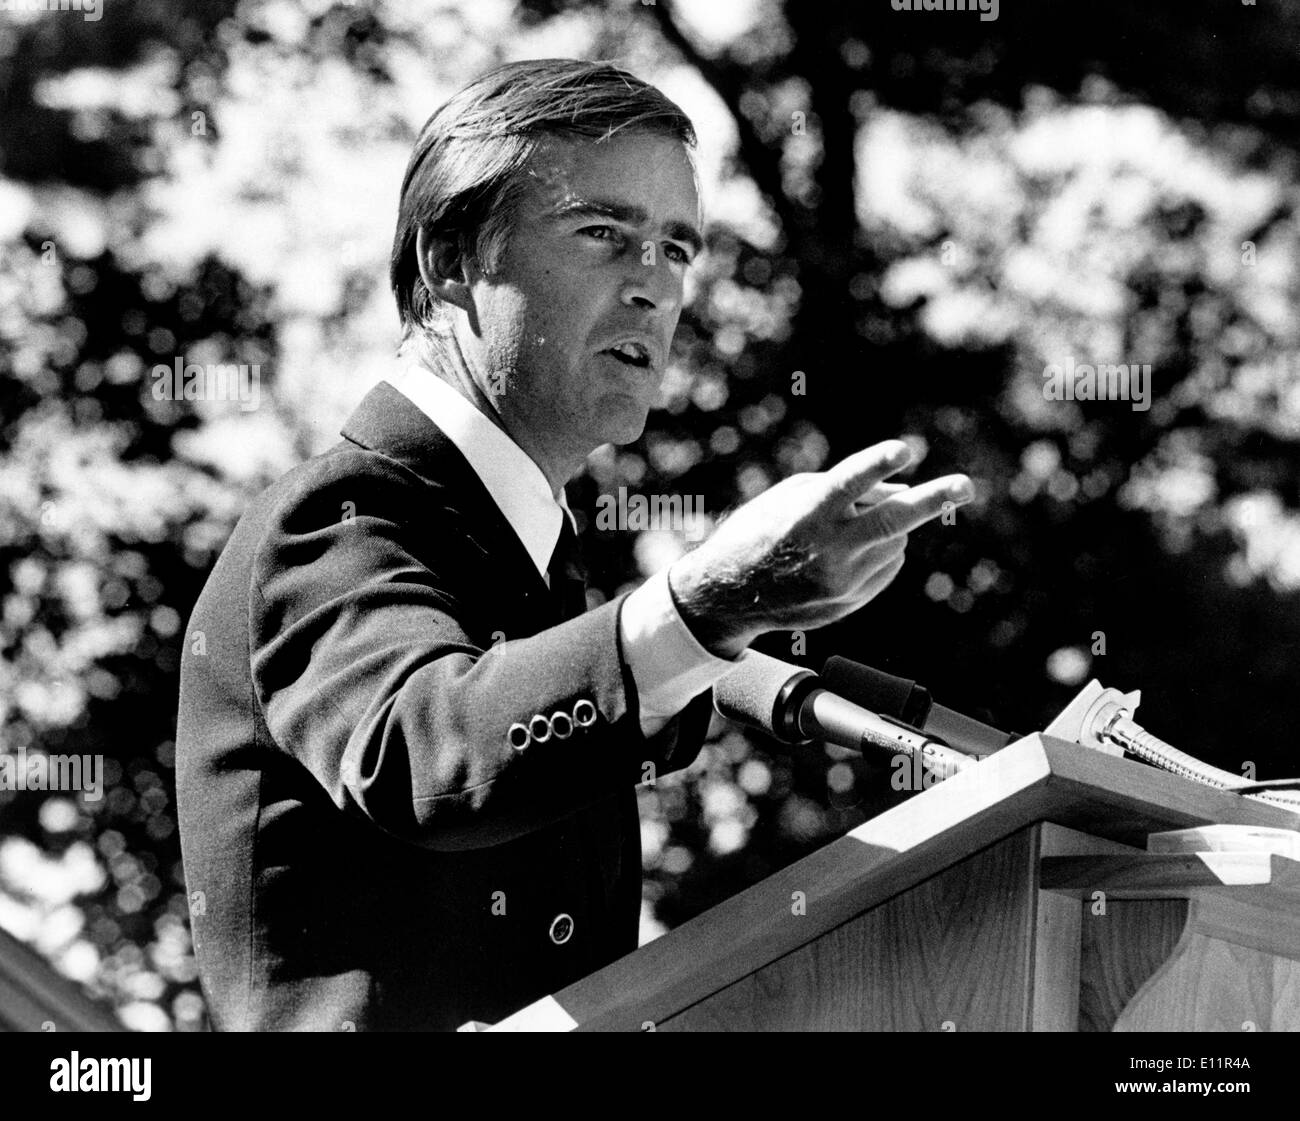 Sep 09, 1979; Concord, NH, USA; EDMUND 'JERRY' BROWN, former Governor of California, during a visit to New Hampshire in 1979. Stock Photo